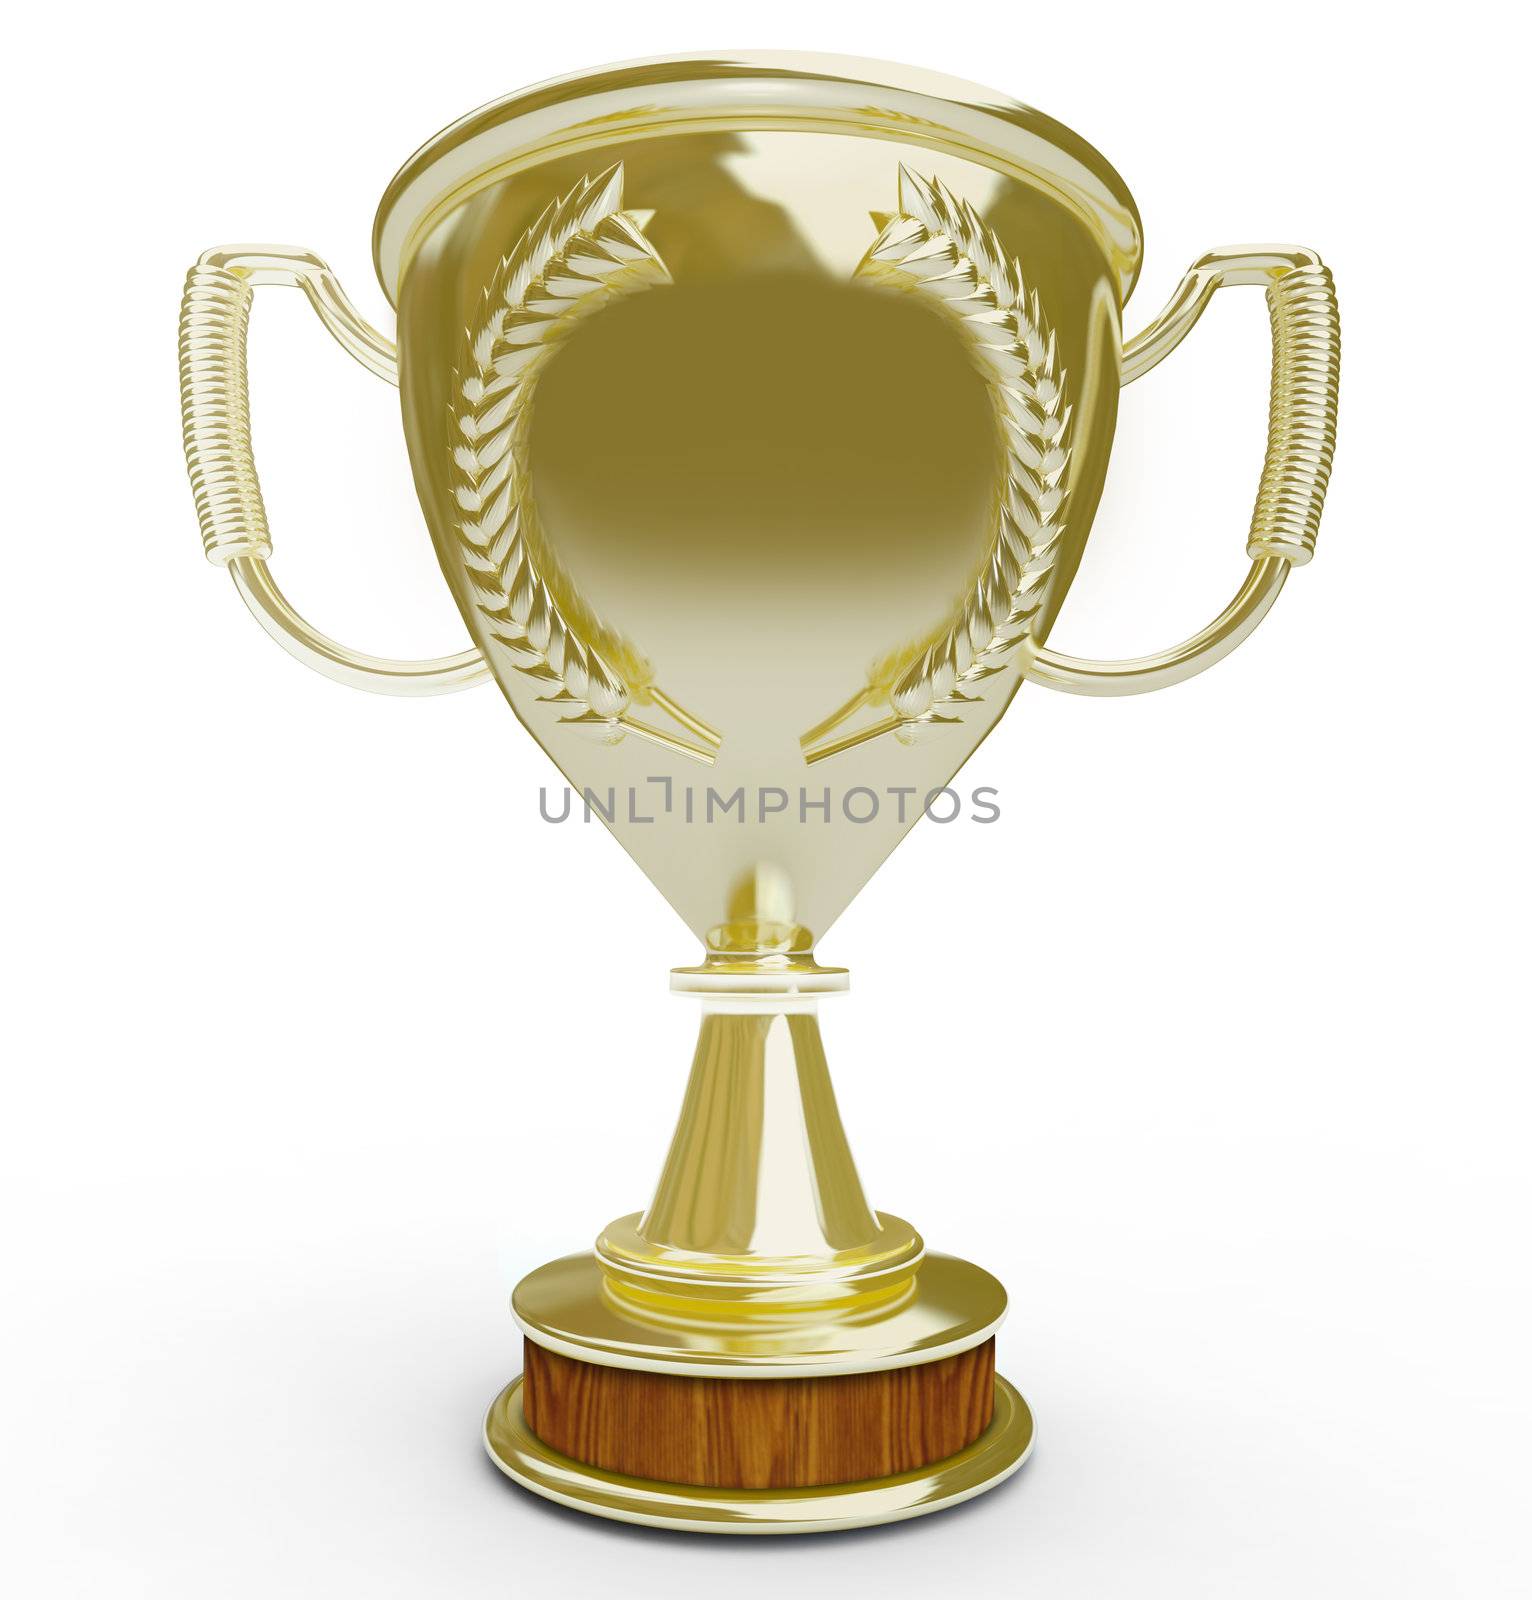 A golden trophy with a blank space on its front for you to place your own text in recognition of a job well done and congratulating someone on an important achievement